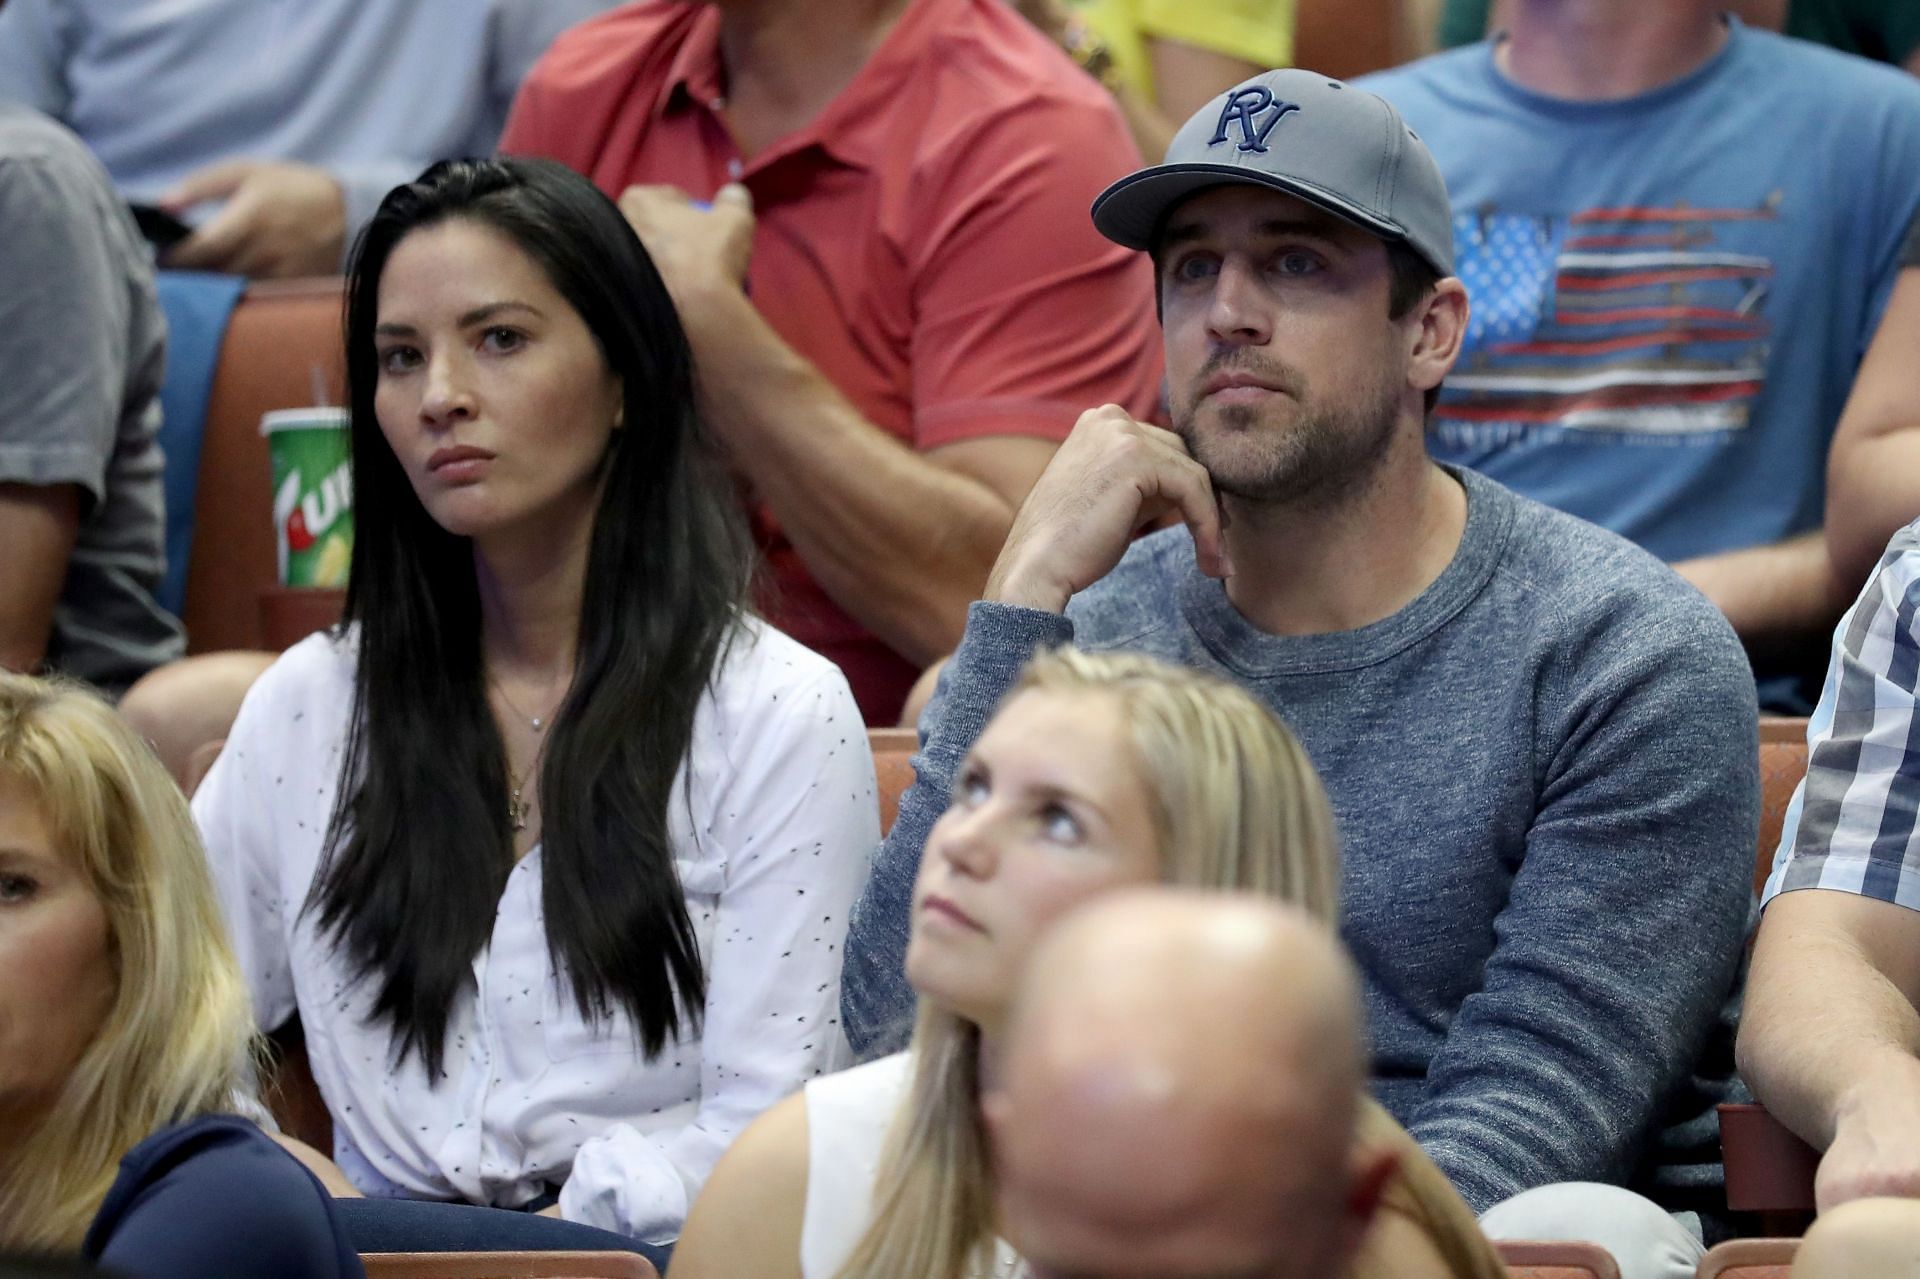 Aaron Rodgers spotted attending an NCAA Basketball game along with ex-girlfriend Olivia Munn